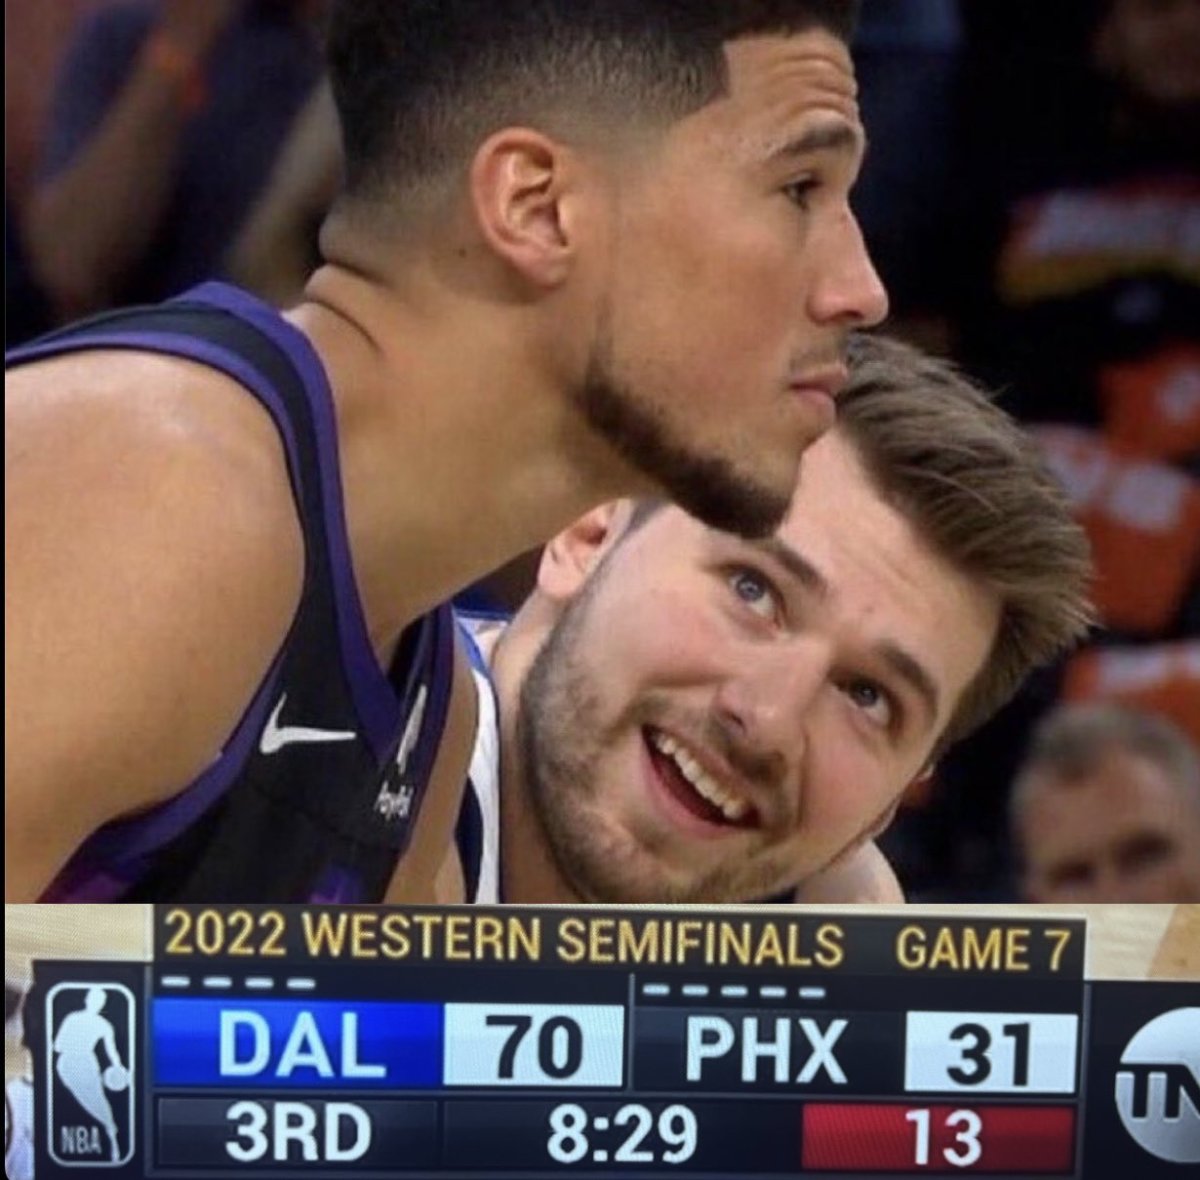 NBA Fan Posts A Photo Of Luka Doncic Looking At Devin Booker, Could Become A New Meme: "Everybody Acts Tough When They Up"